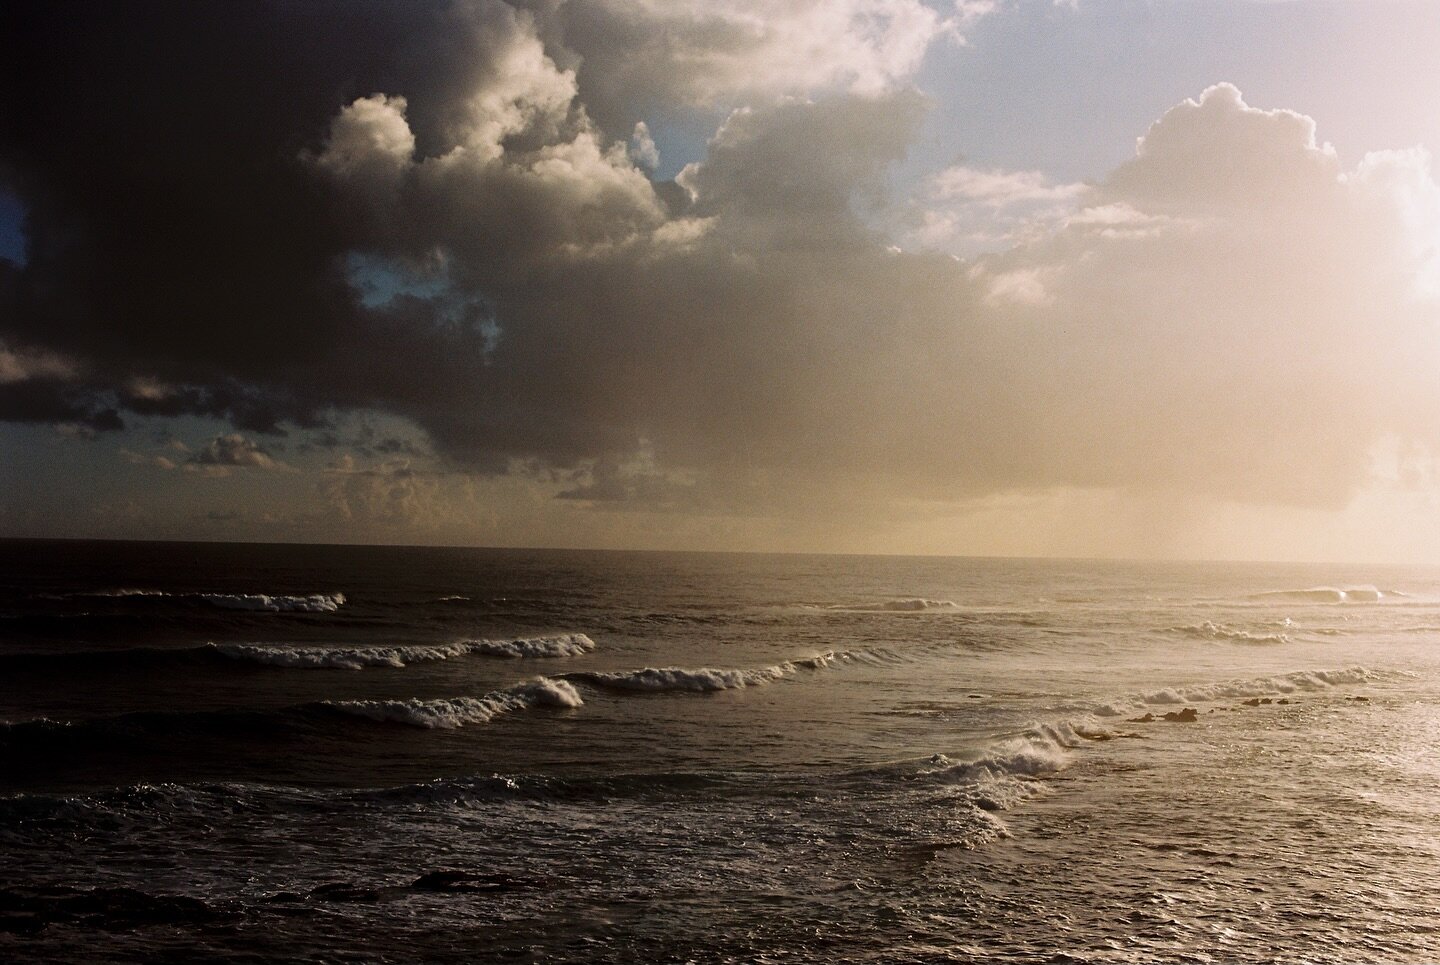 Last year around this time I went to Puerto Rico and after dropping my mom and grandmother off at the airport at 4:30am, I walked 3 miles around old San Juan and watched the sunrise from the coast. This is one of the film images (scanned by @thefindl